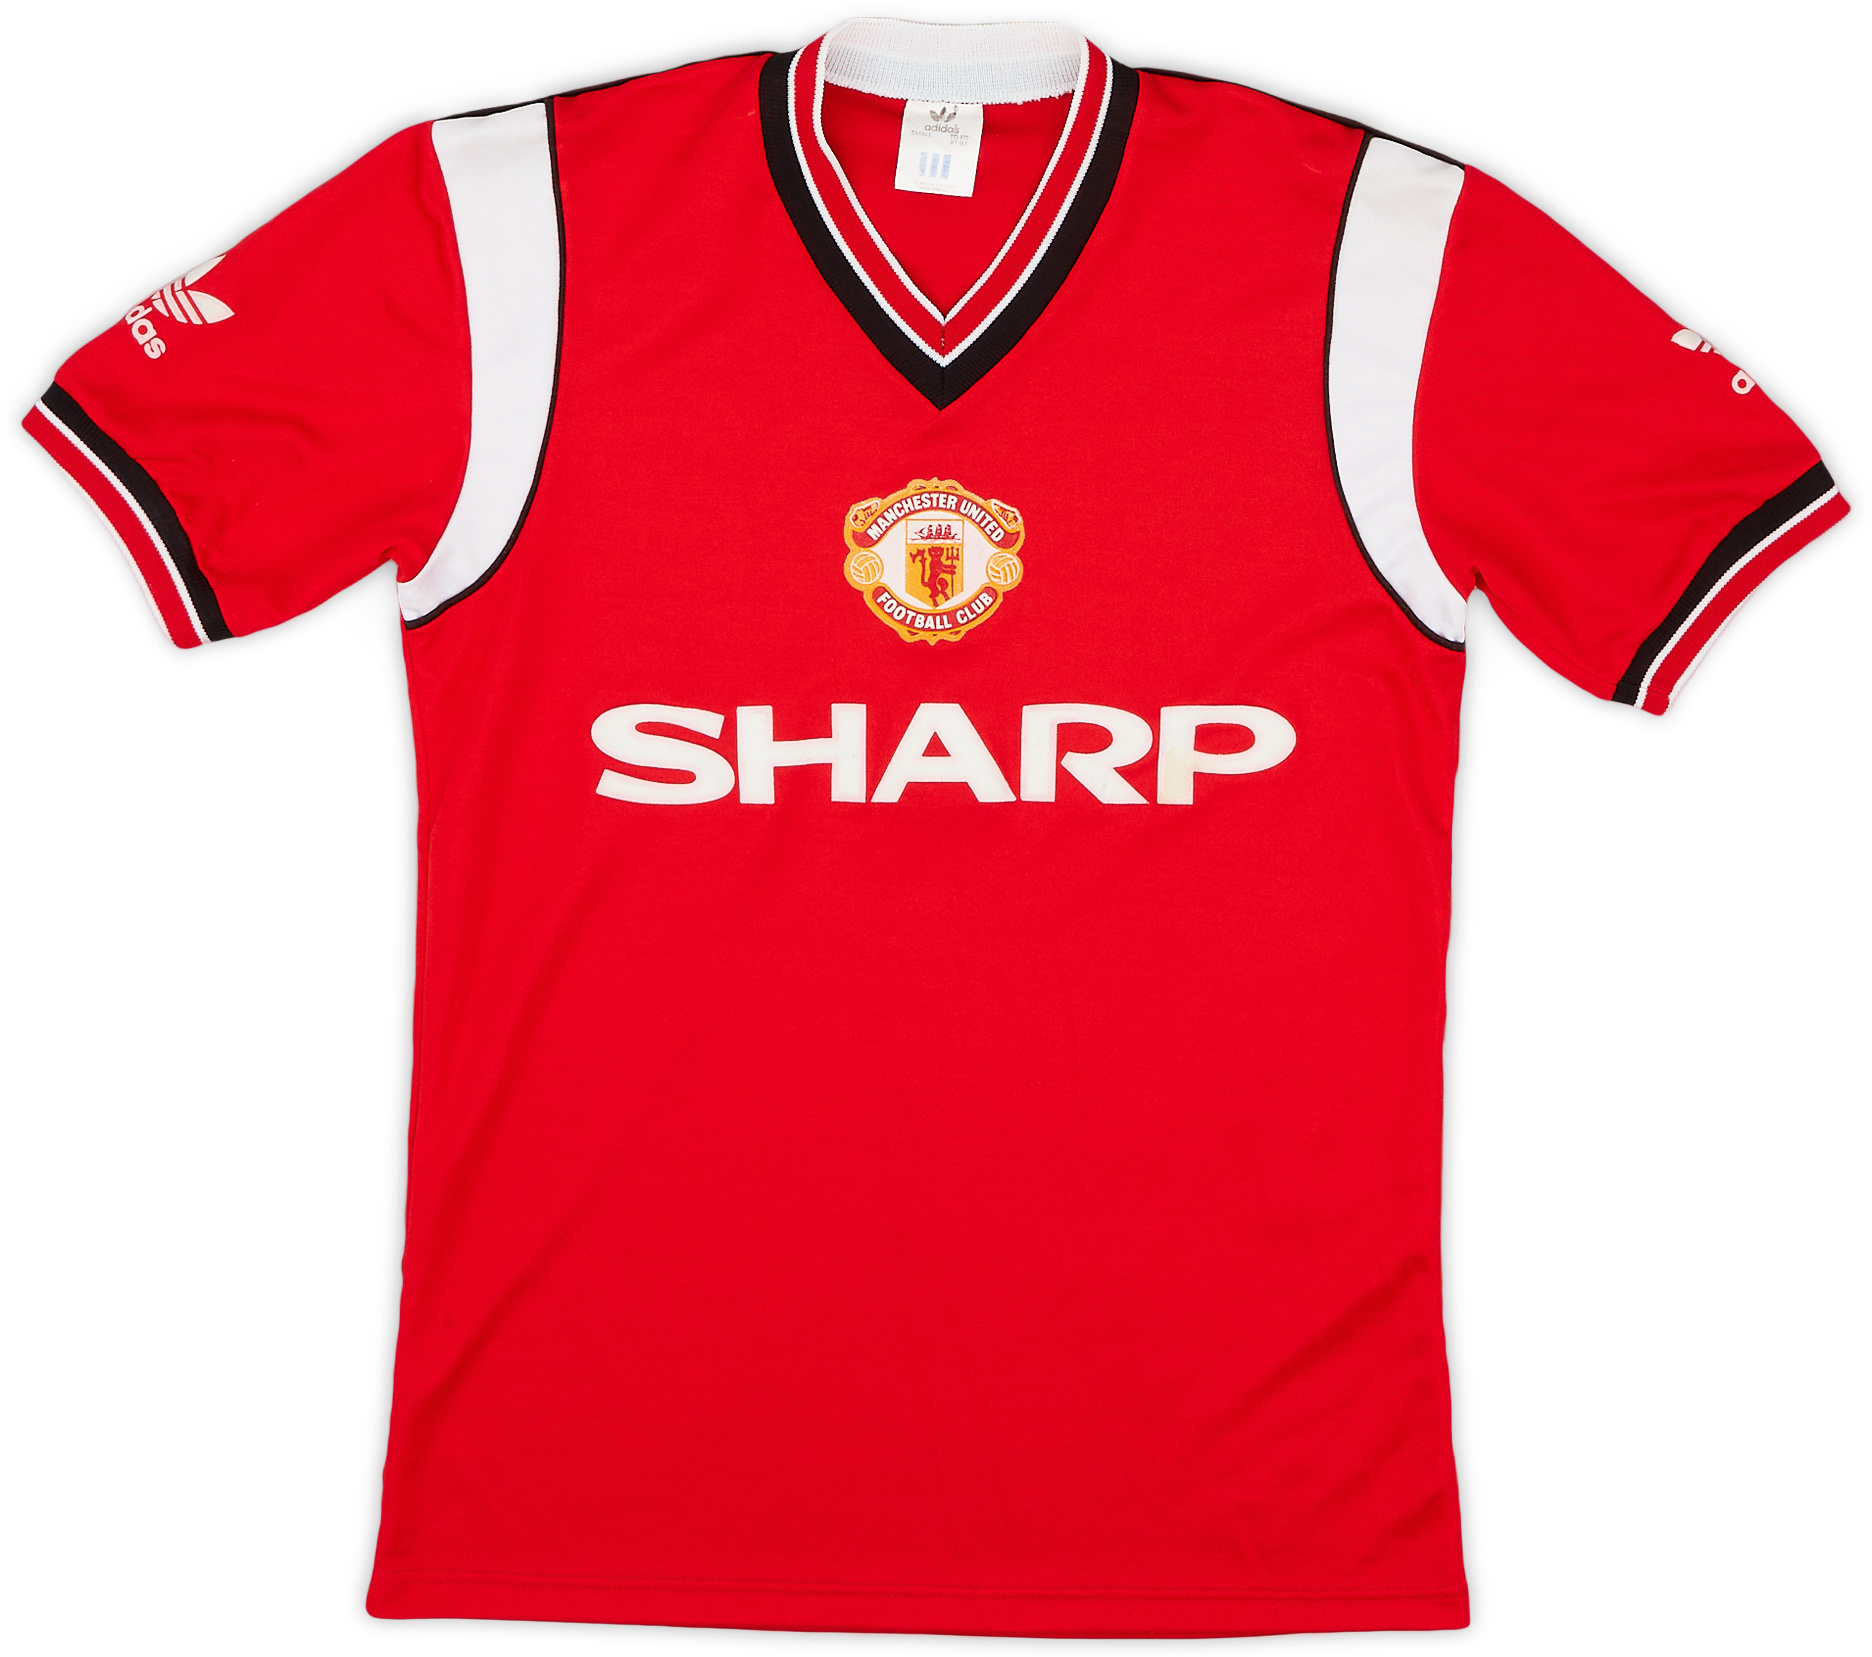 1984-86 Manchester United Home Shirt - 9/10 - ()